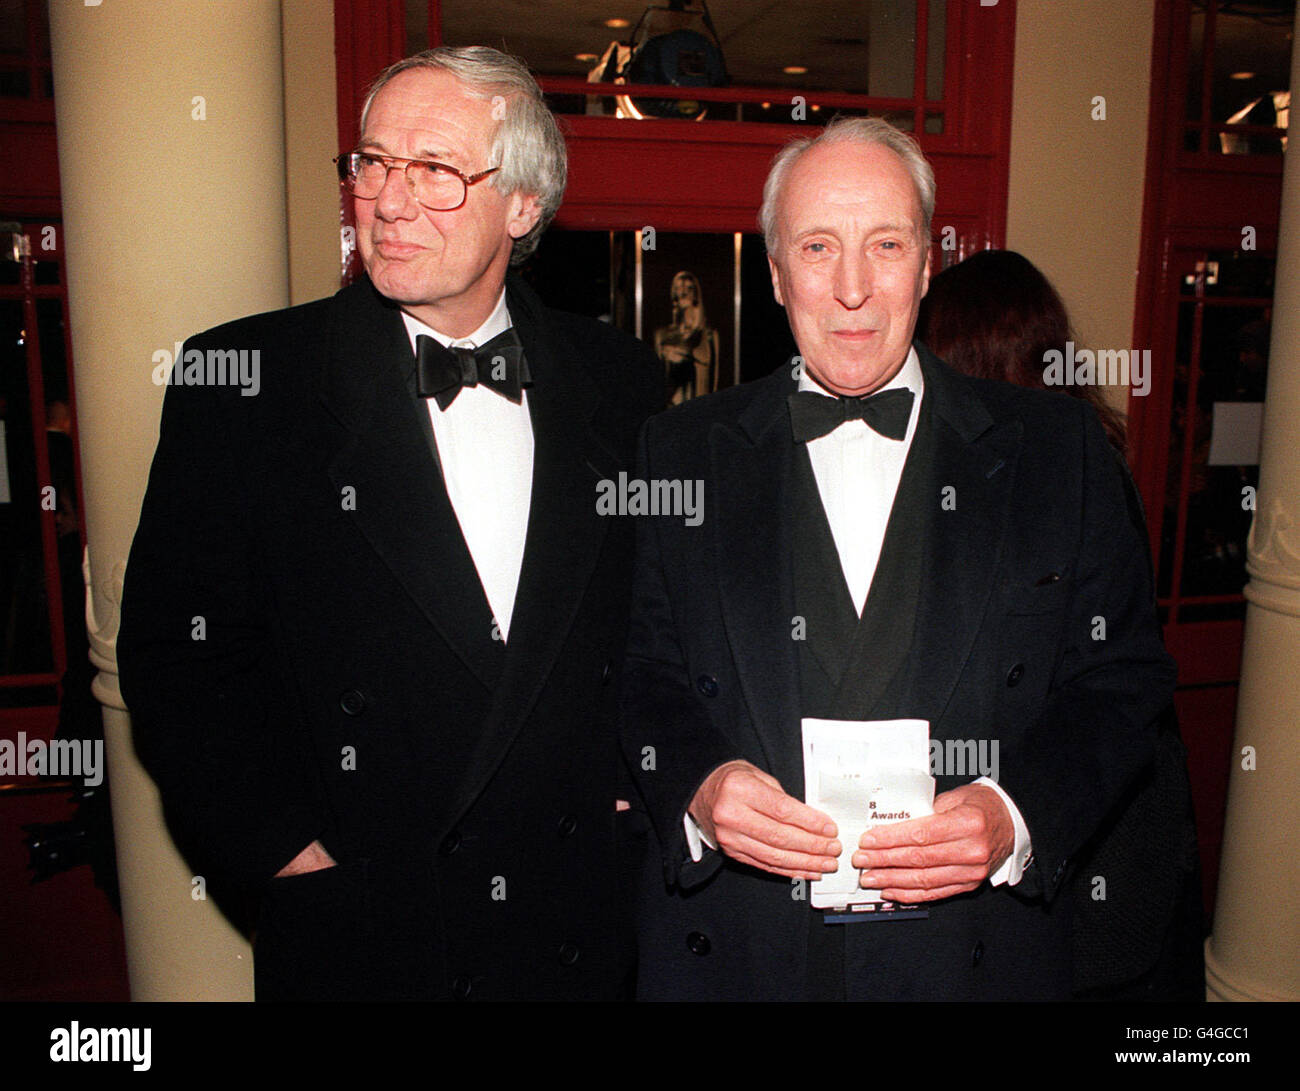 PA NEWS PHOTO 5/12/98 TV FILM CRITIC BARRY NORMAN (LEFT) AND ACTOR IAN RICHARDSON AT THE EUROPEAN FILM AWARDS, HELD AT LONDON'S OLD VIC THEATRE. Stock Photo